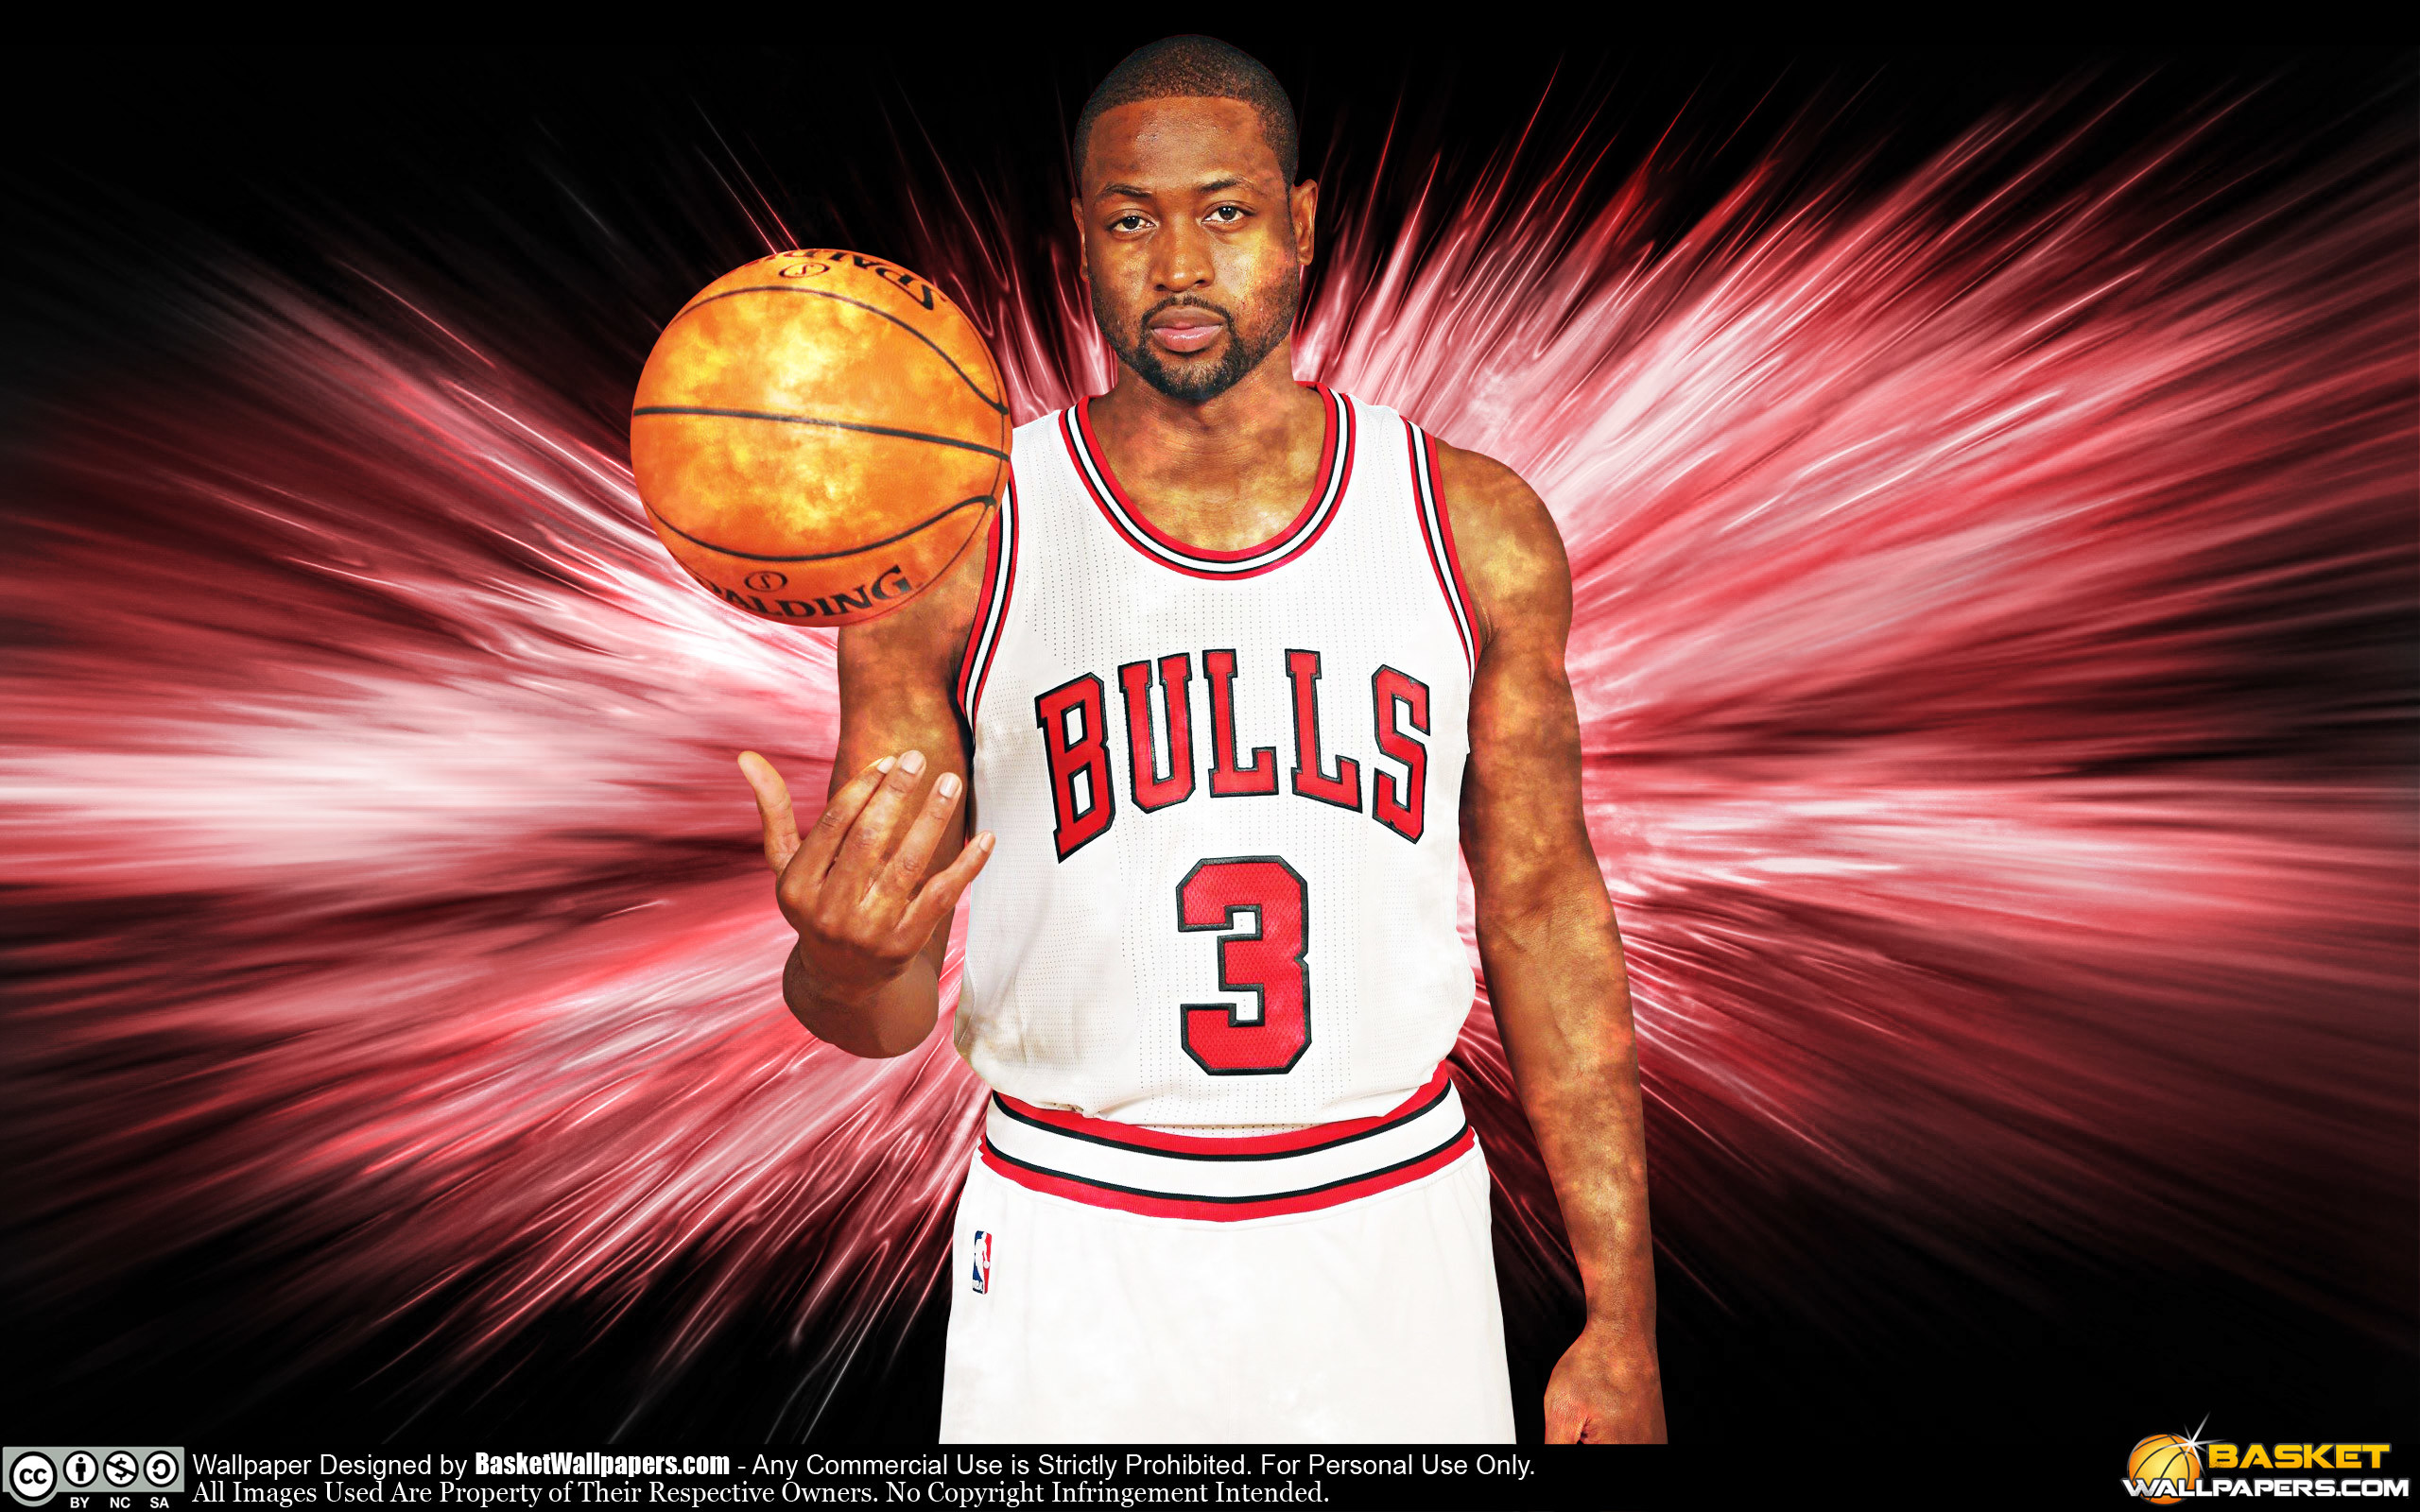 2560x1600 Dwyane Wade Wallpapers Basketball Wallpapers at | HD Wallpapers | Pinterest  | Dwyane wade wallpaper and Wallpaper